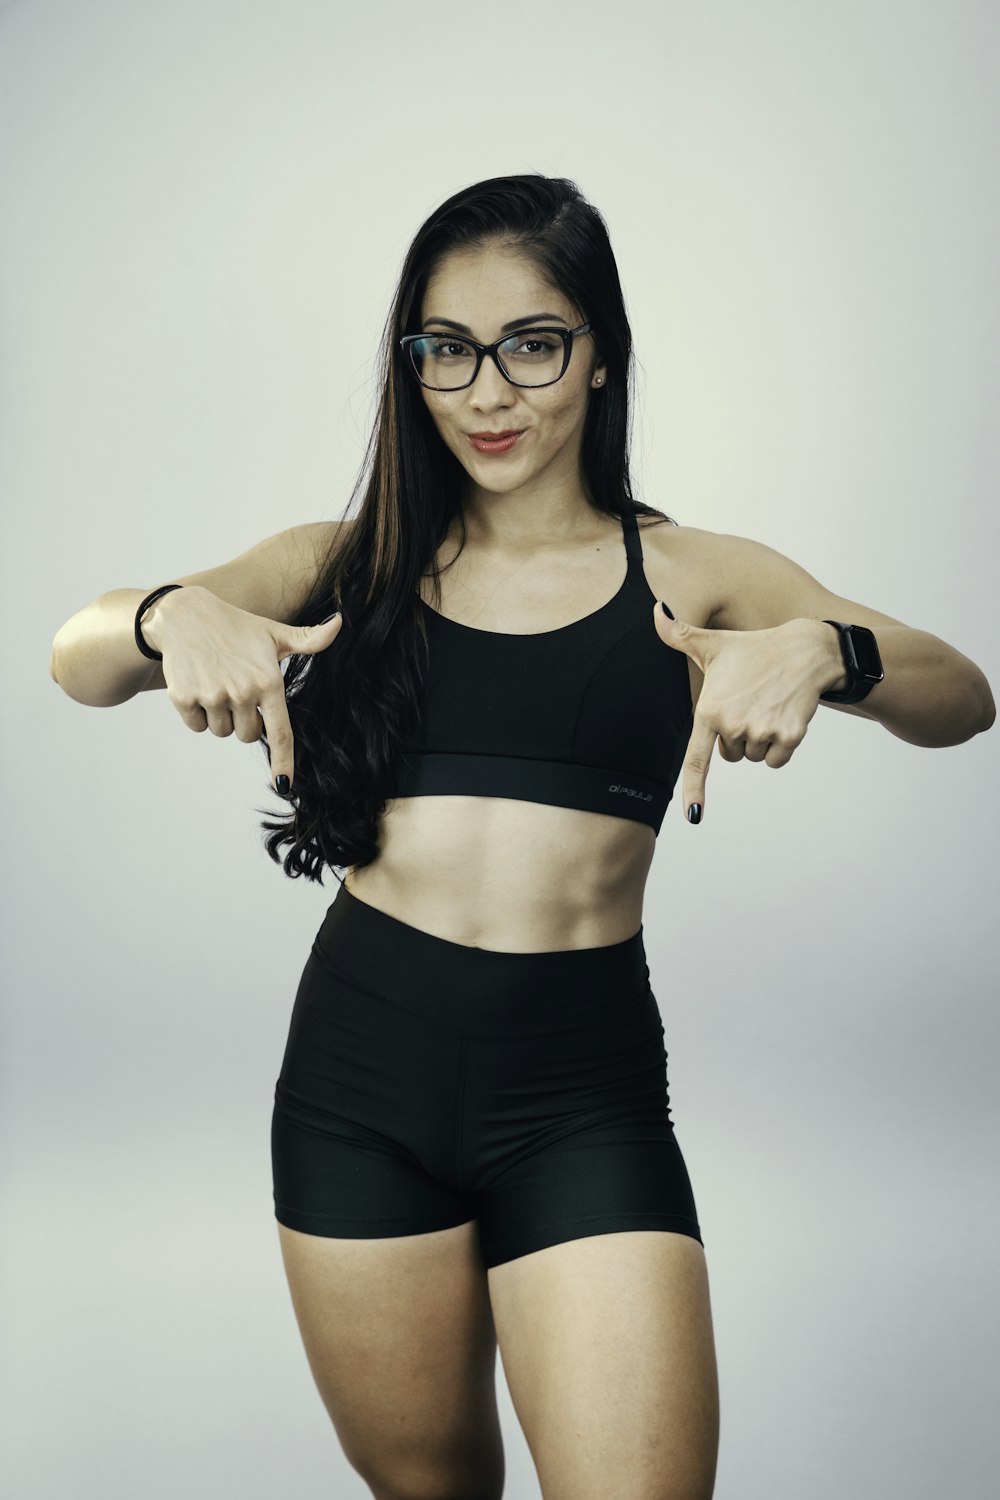 a woman in a black sports bra top pointing at the camera